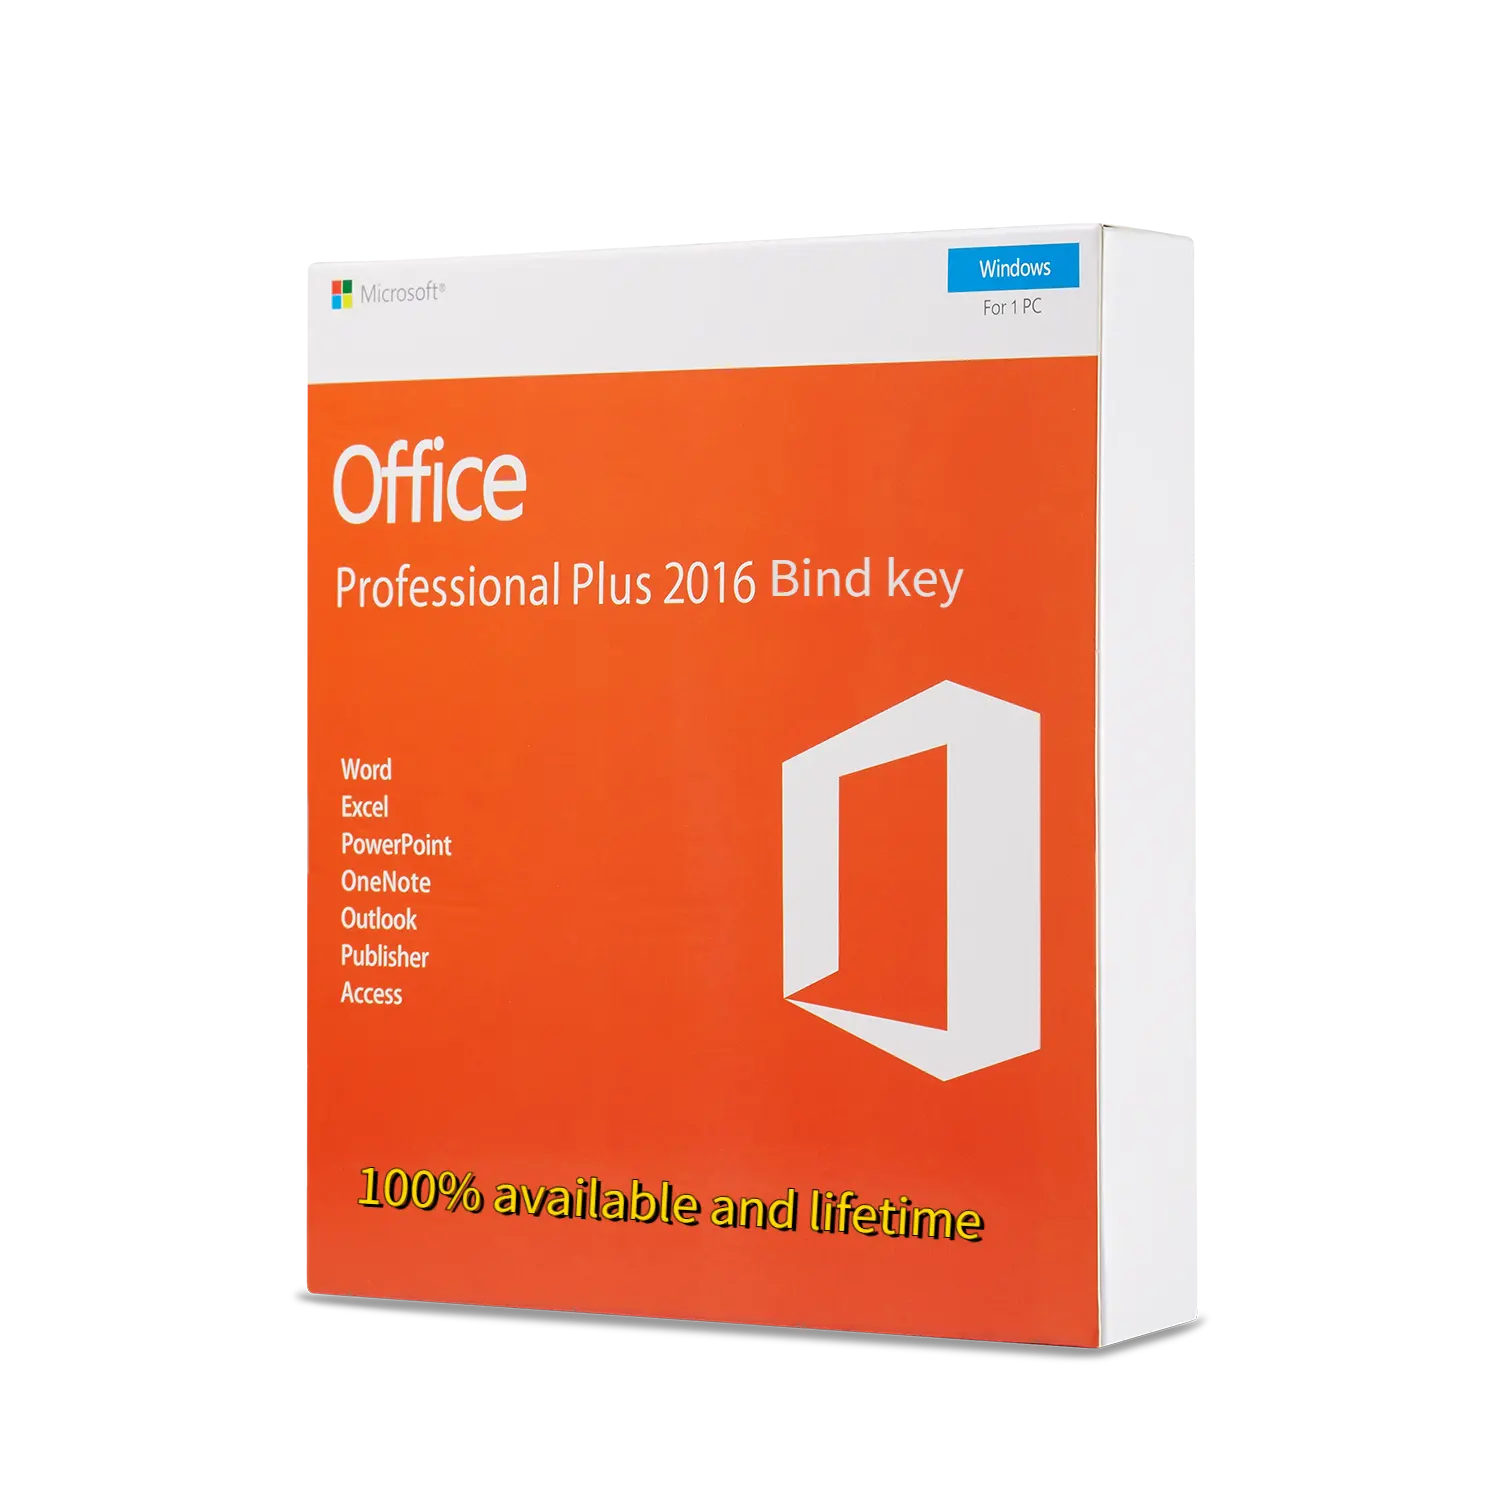 Office Professional Plus 2016 product key activation worldwide bind acount key and lisence